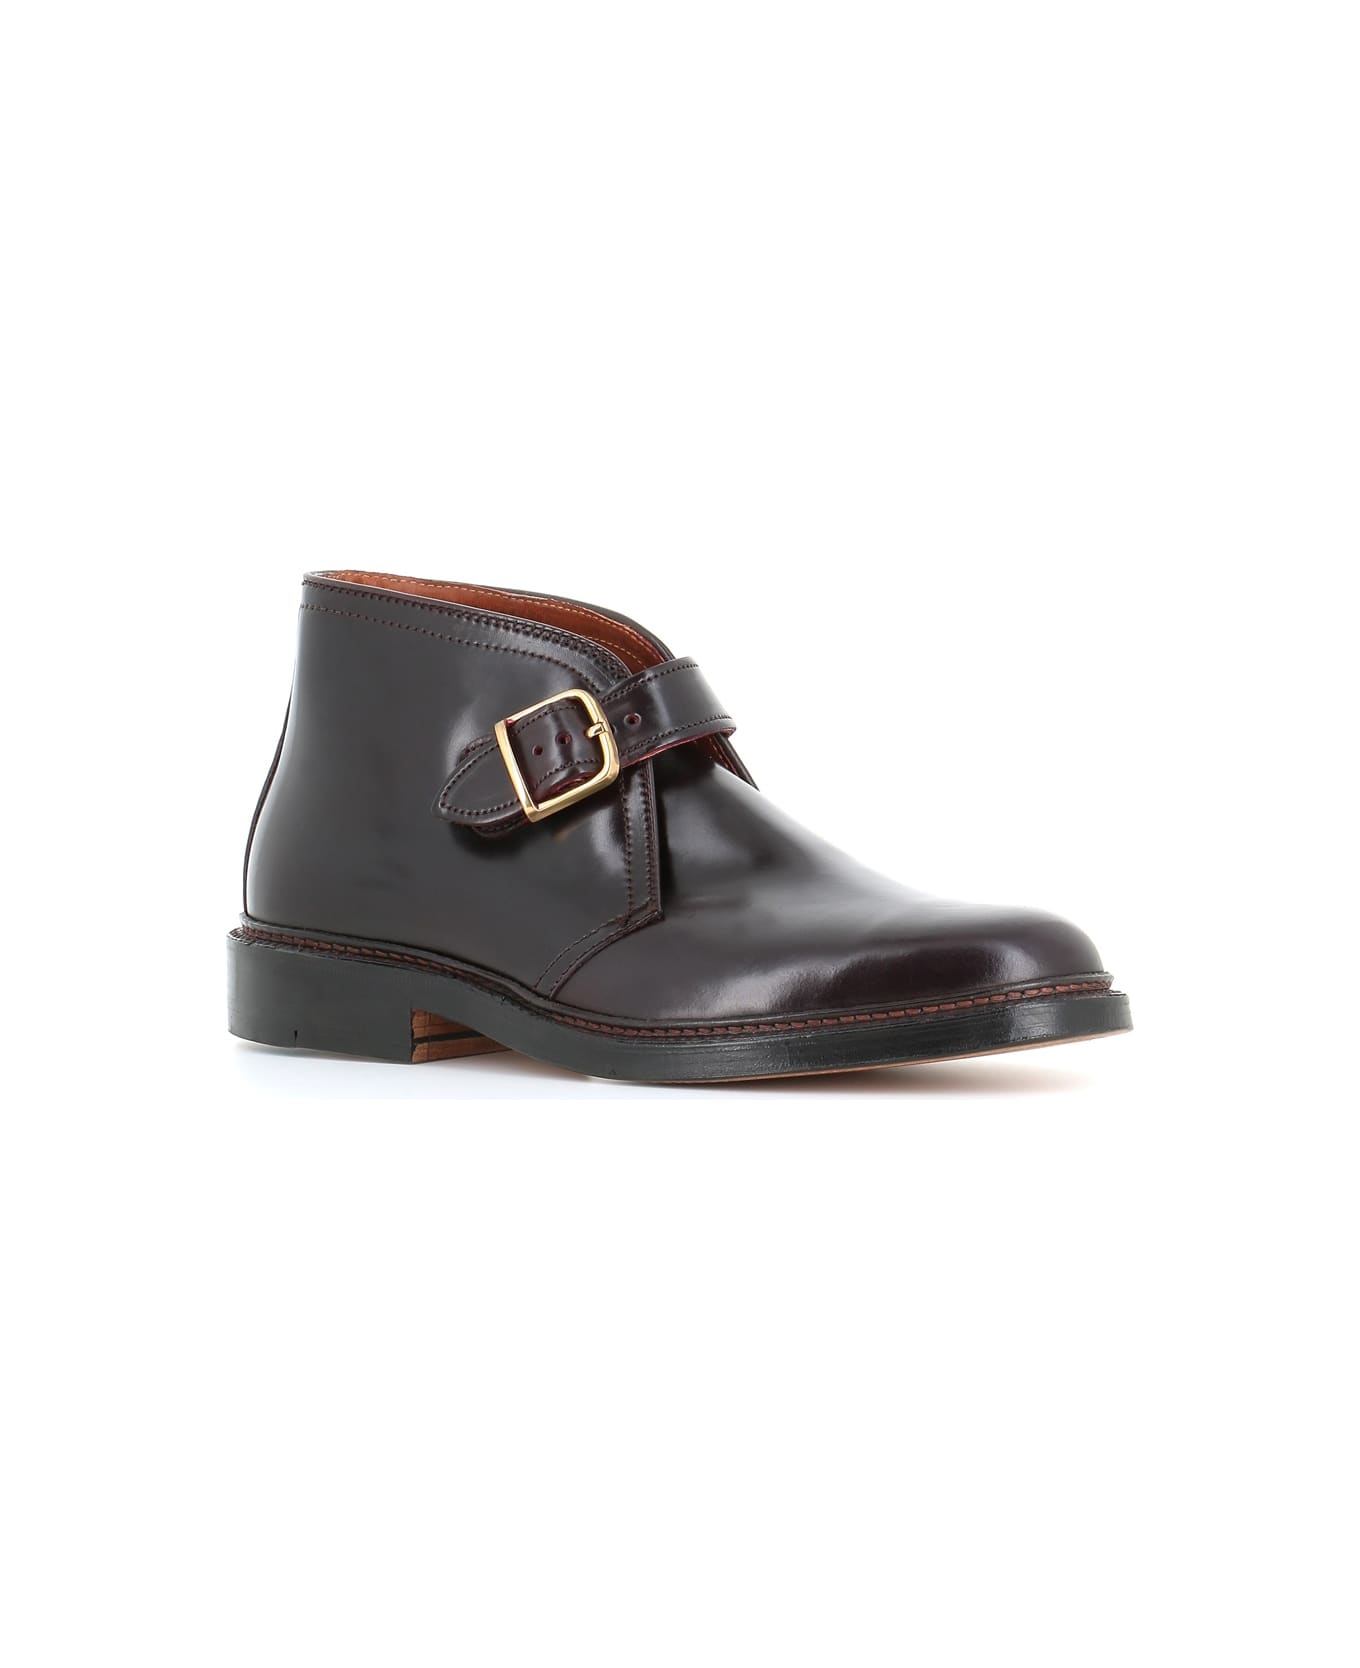 Alden Ankle Boot N6704 - Mahogany